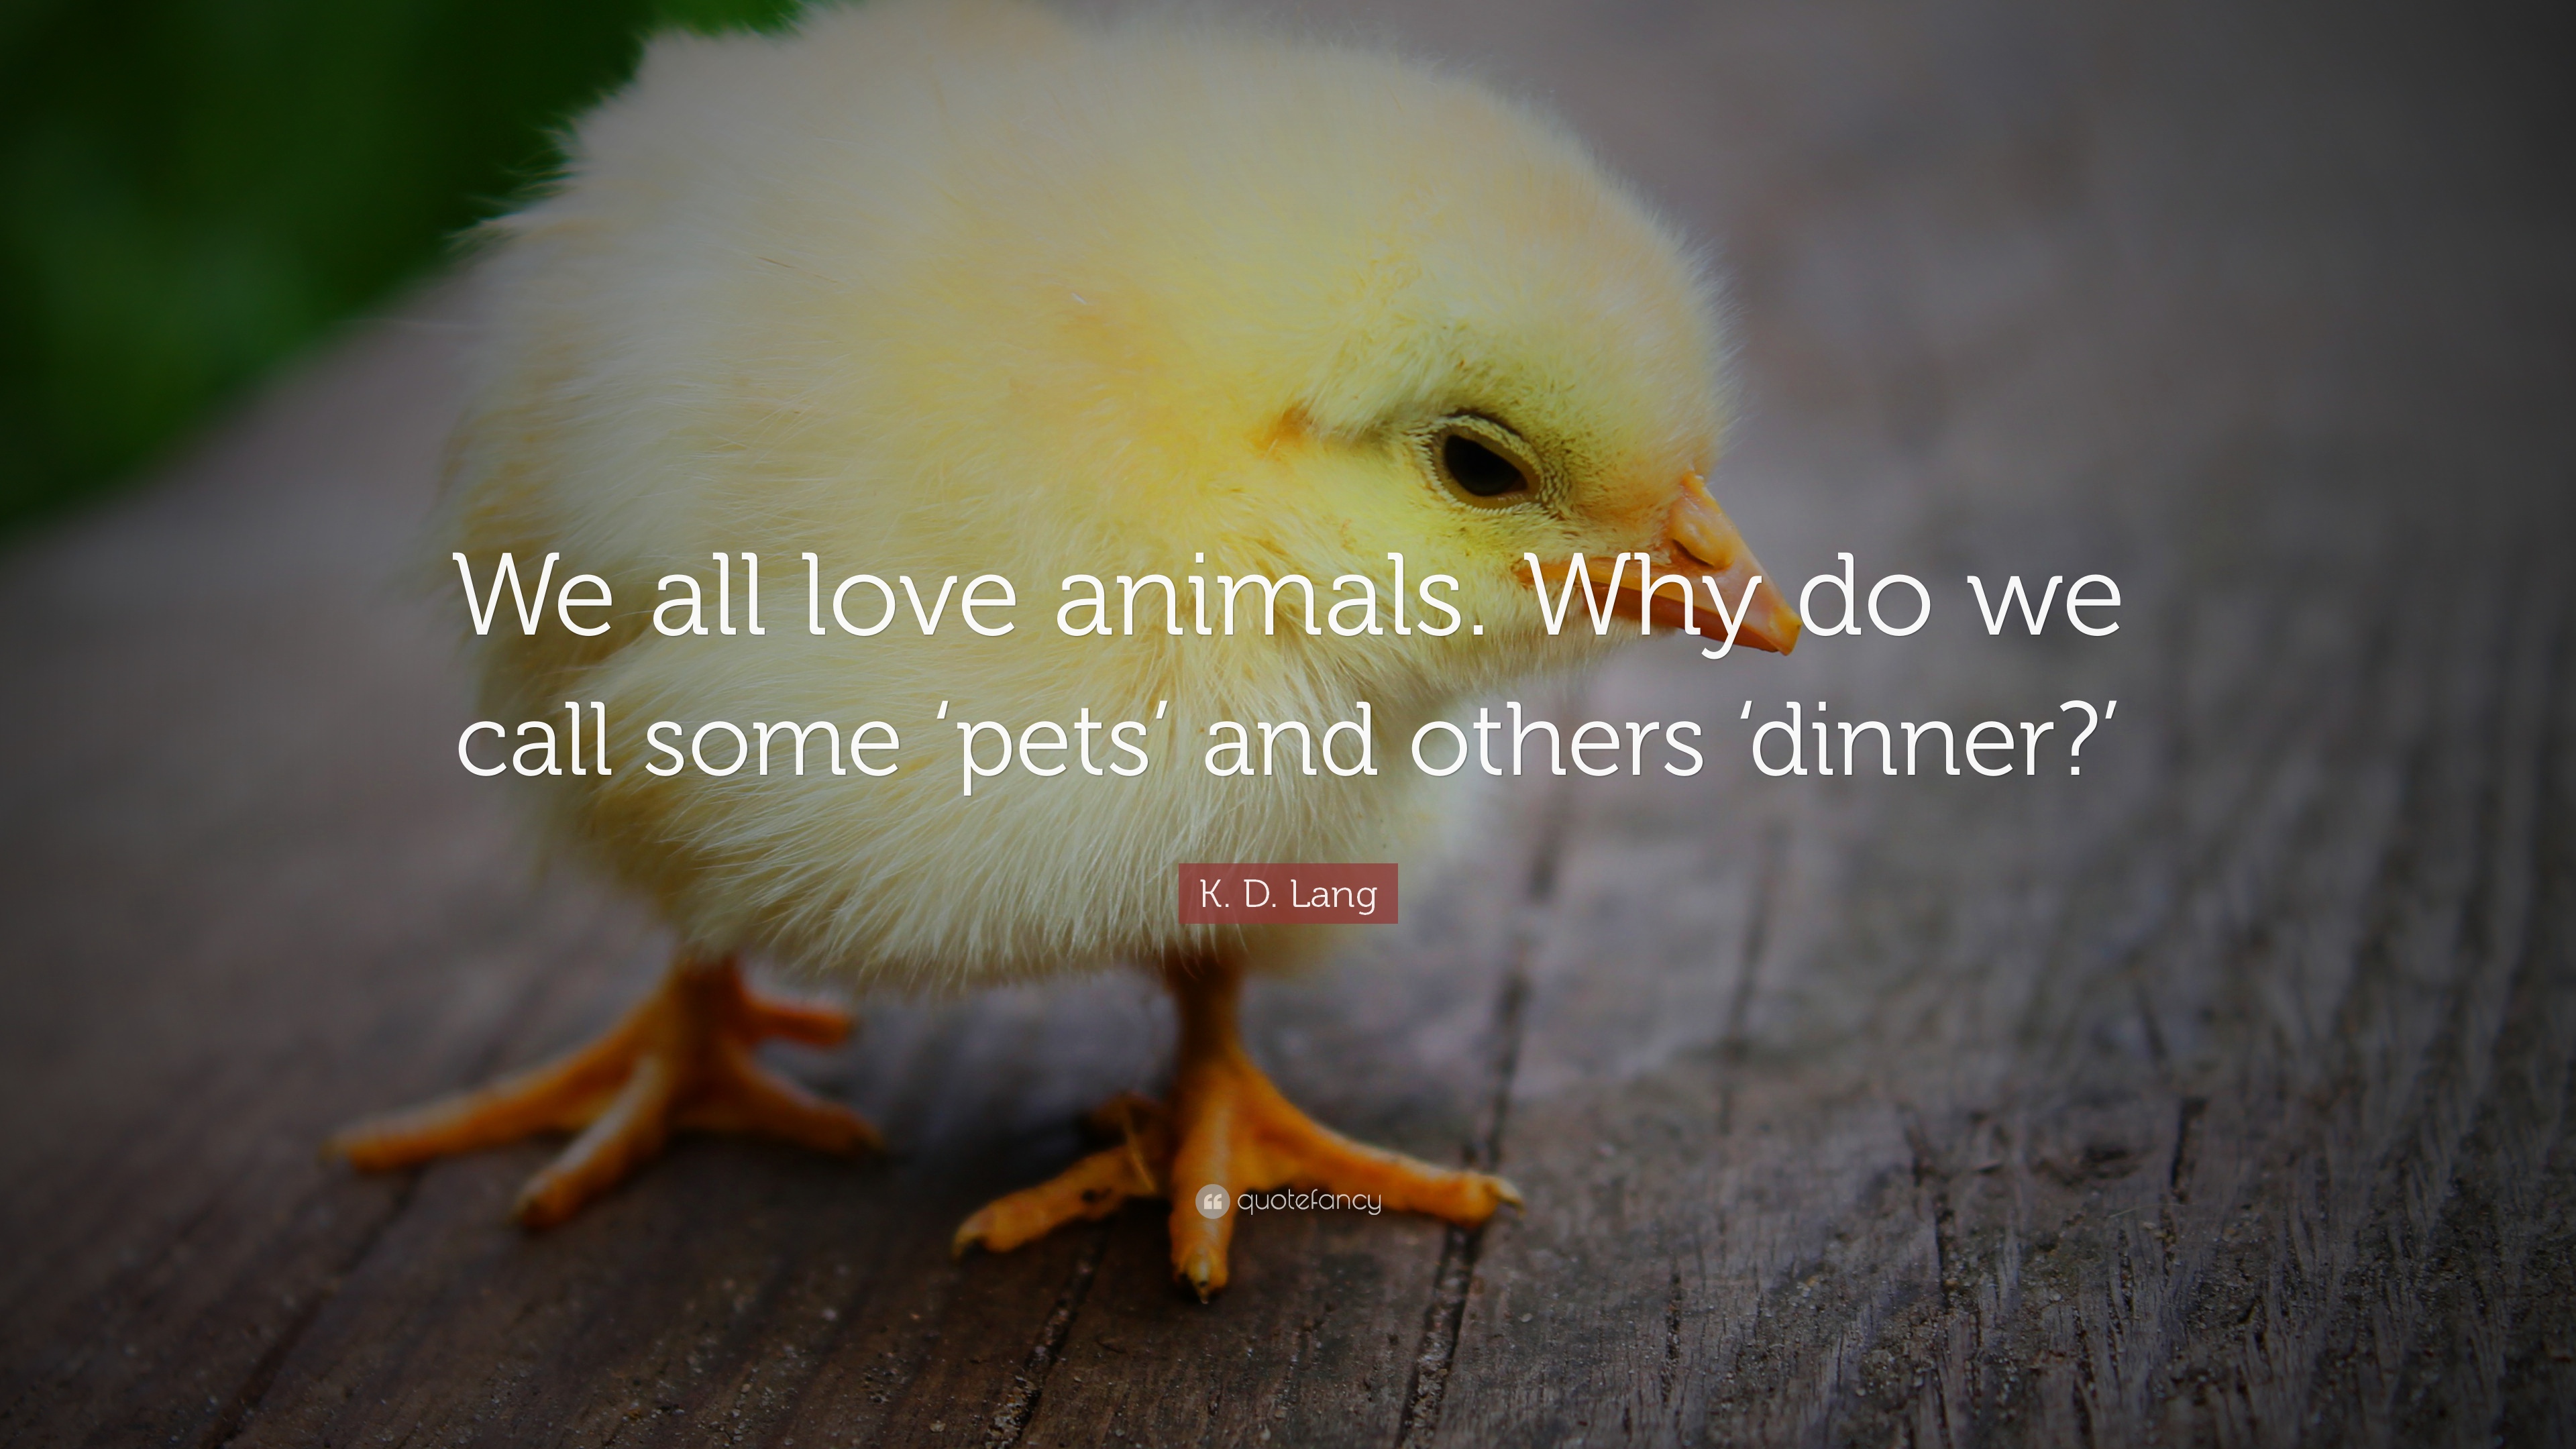 K. D. Lang Quote: “We all love animals. Why do we call some 'pets